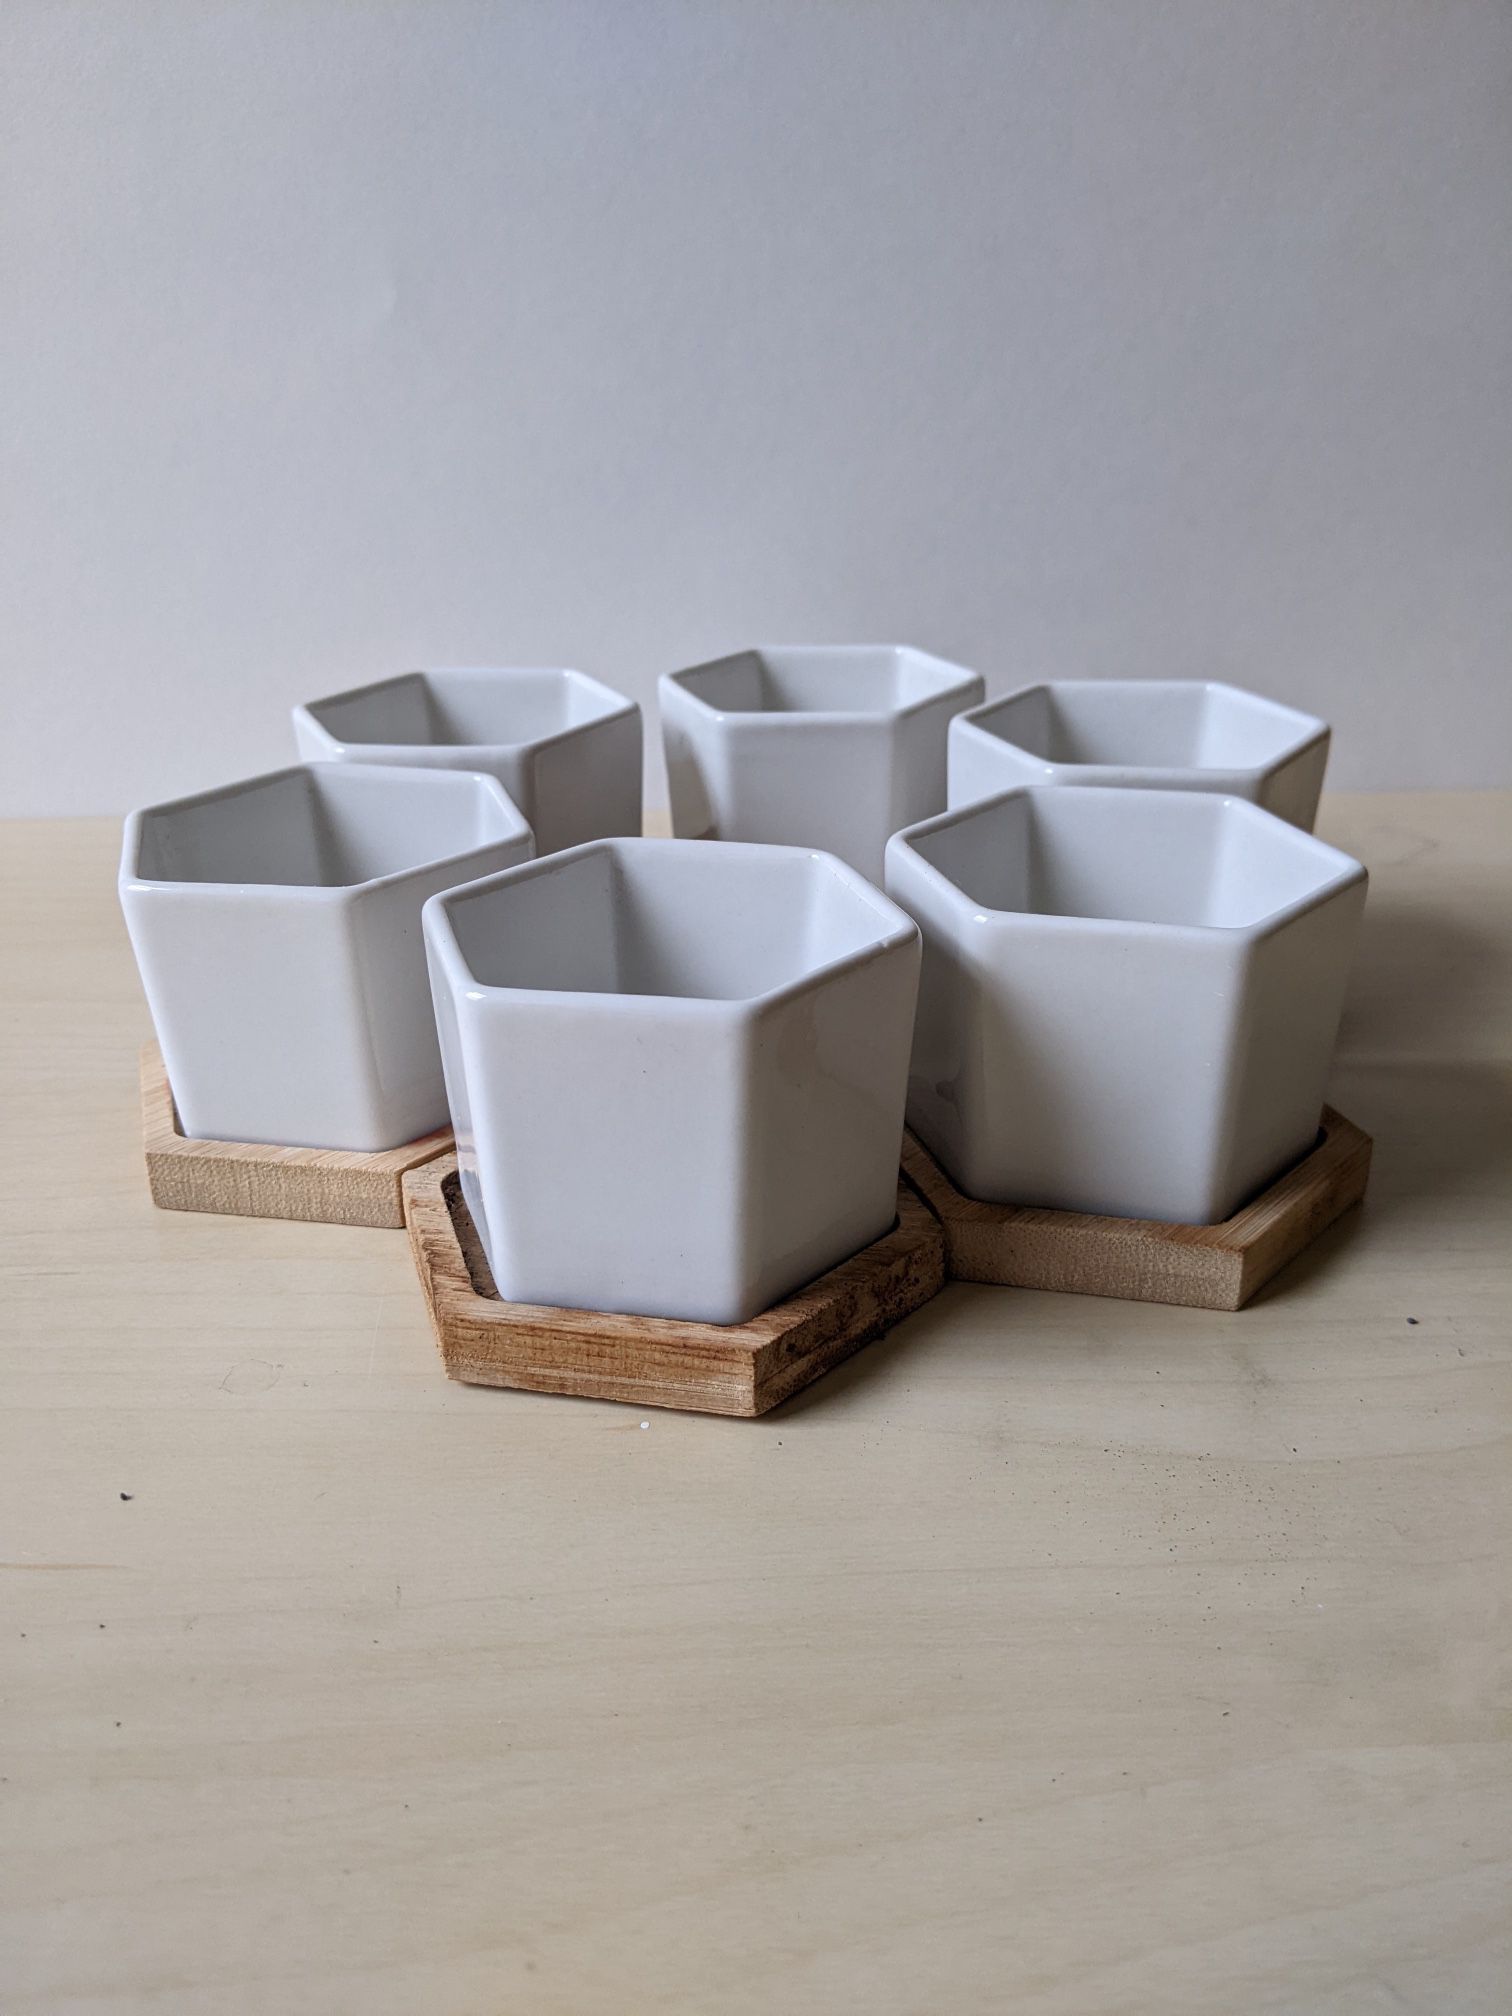 6 Hexagonal Tiny Plant Pots - With Drainage Holes And Bamboo Drainage Trays; Great For Succulents Or Cuttings